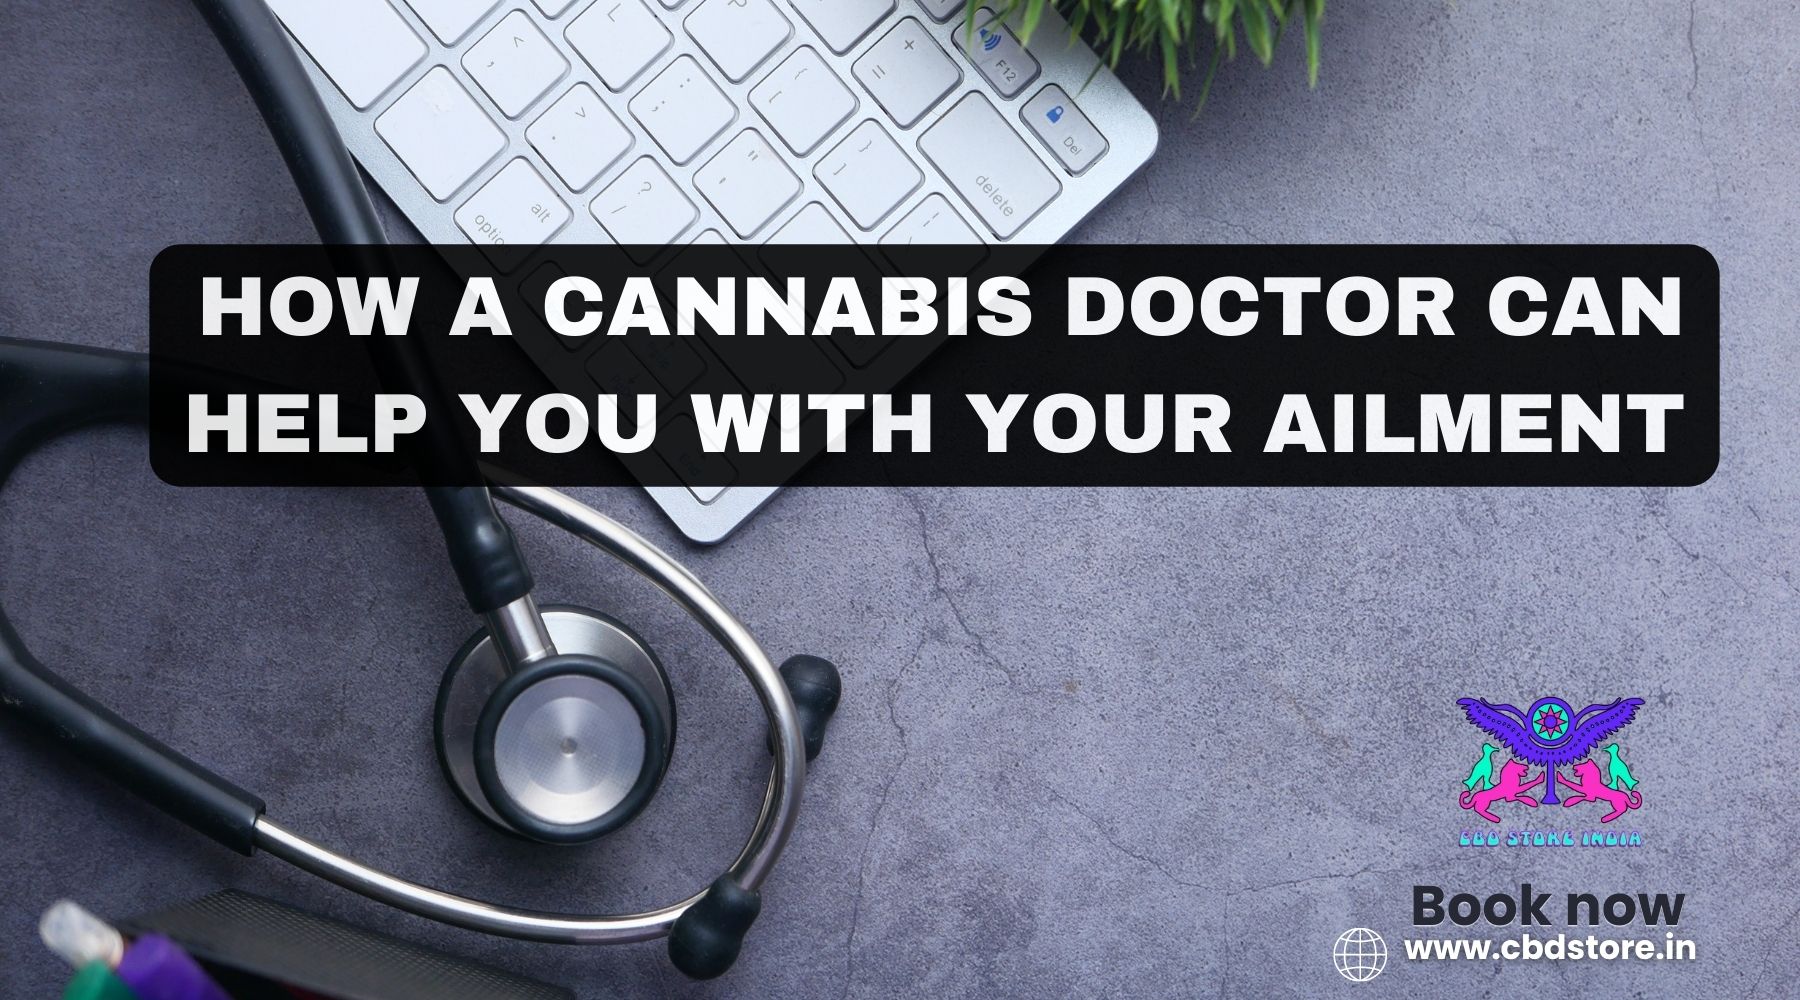 How a Cannabis Doctor can help you with your ailment - CBD Store India